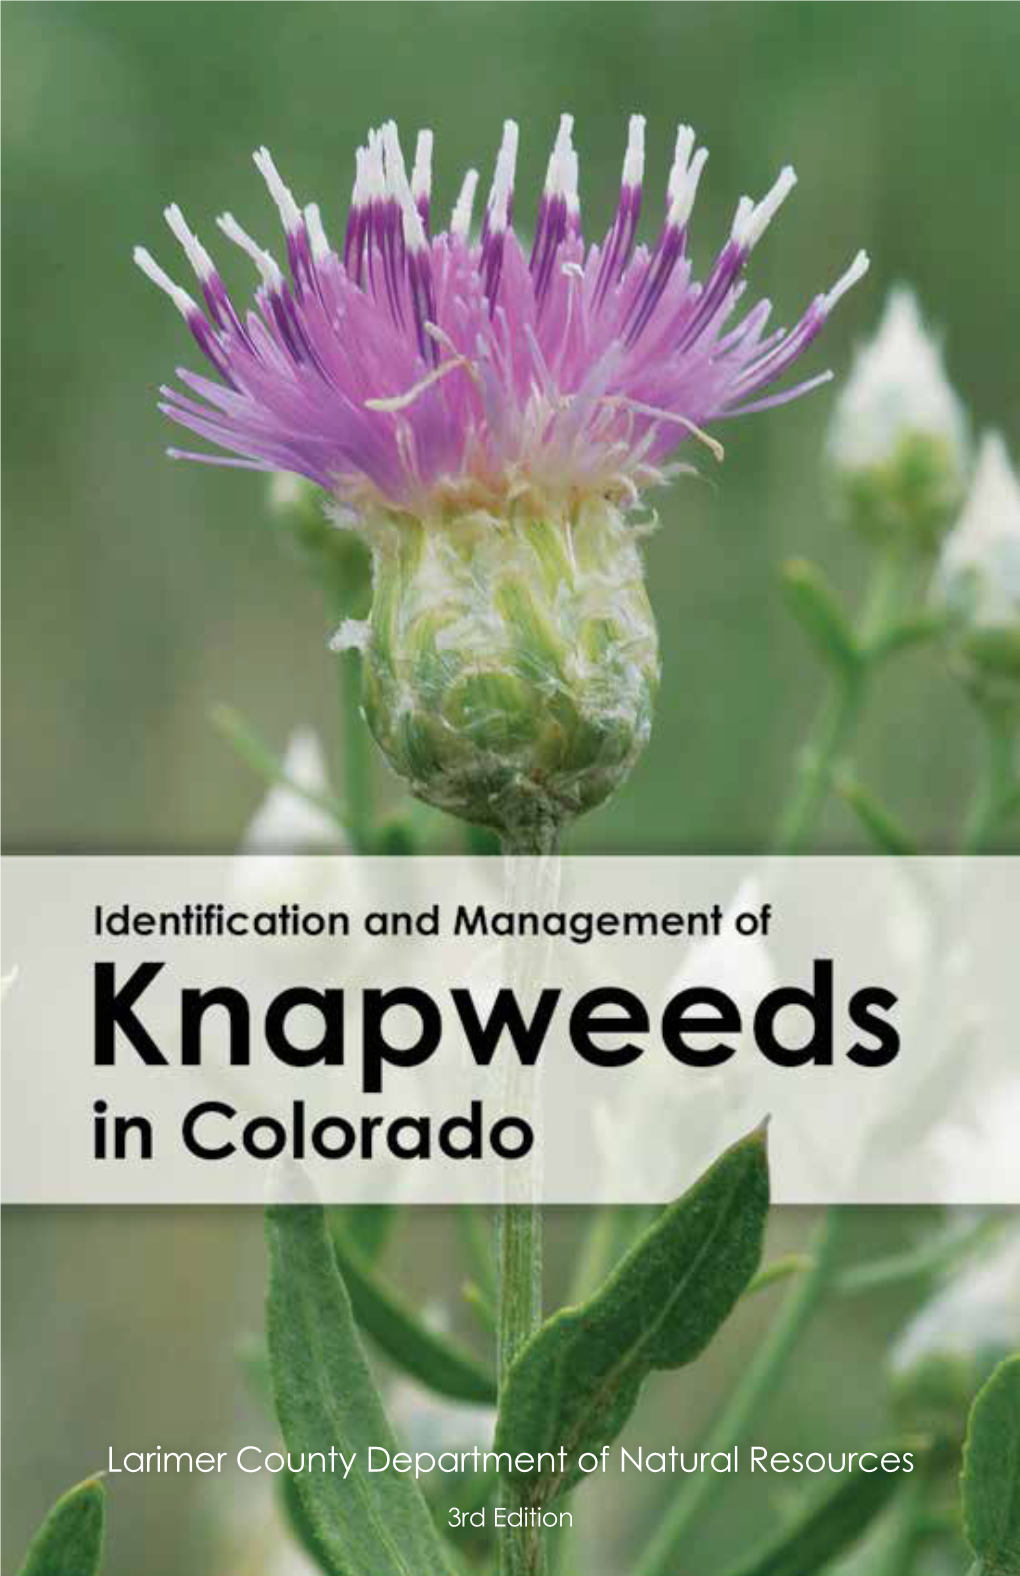 Identification and Management of Knapweeds in Colorado